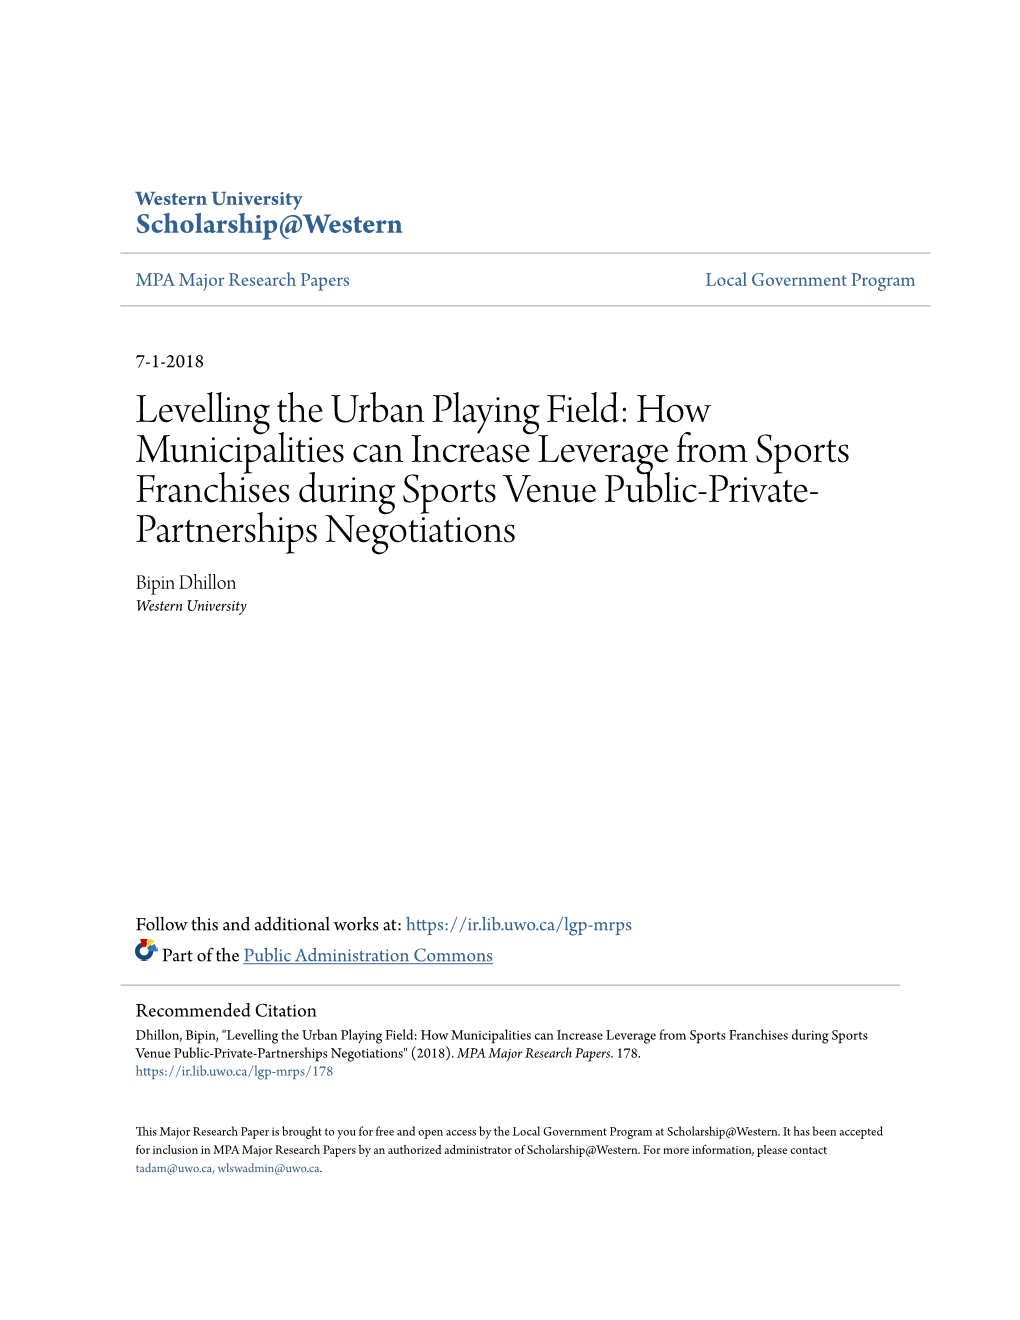 How Municipalities Can Increase Leverage from Sports Franchises During Sports Venue Public-Private- Partnerships Negotiations Bipin Dhillon Western University